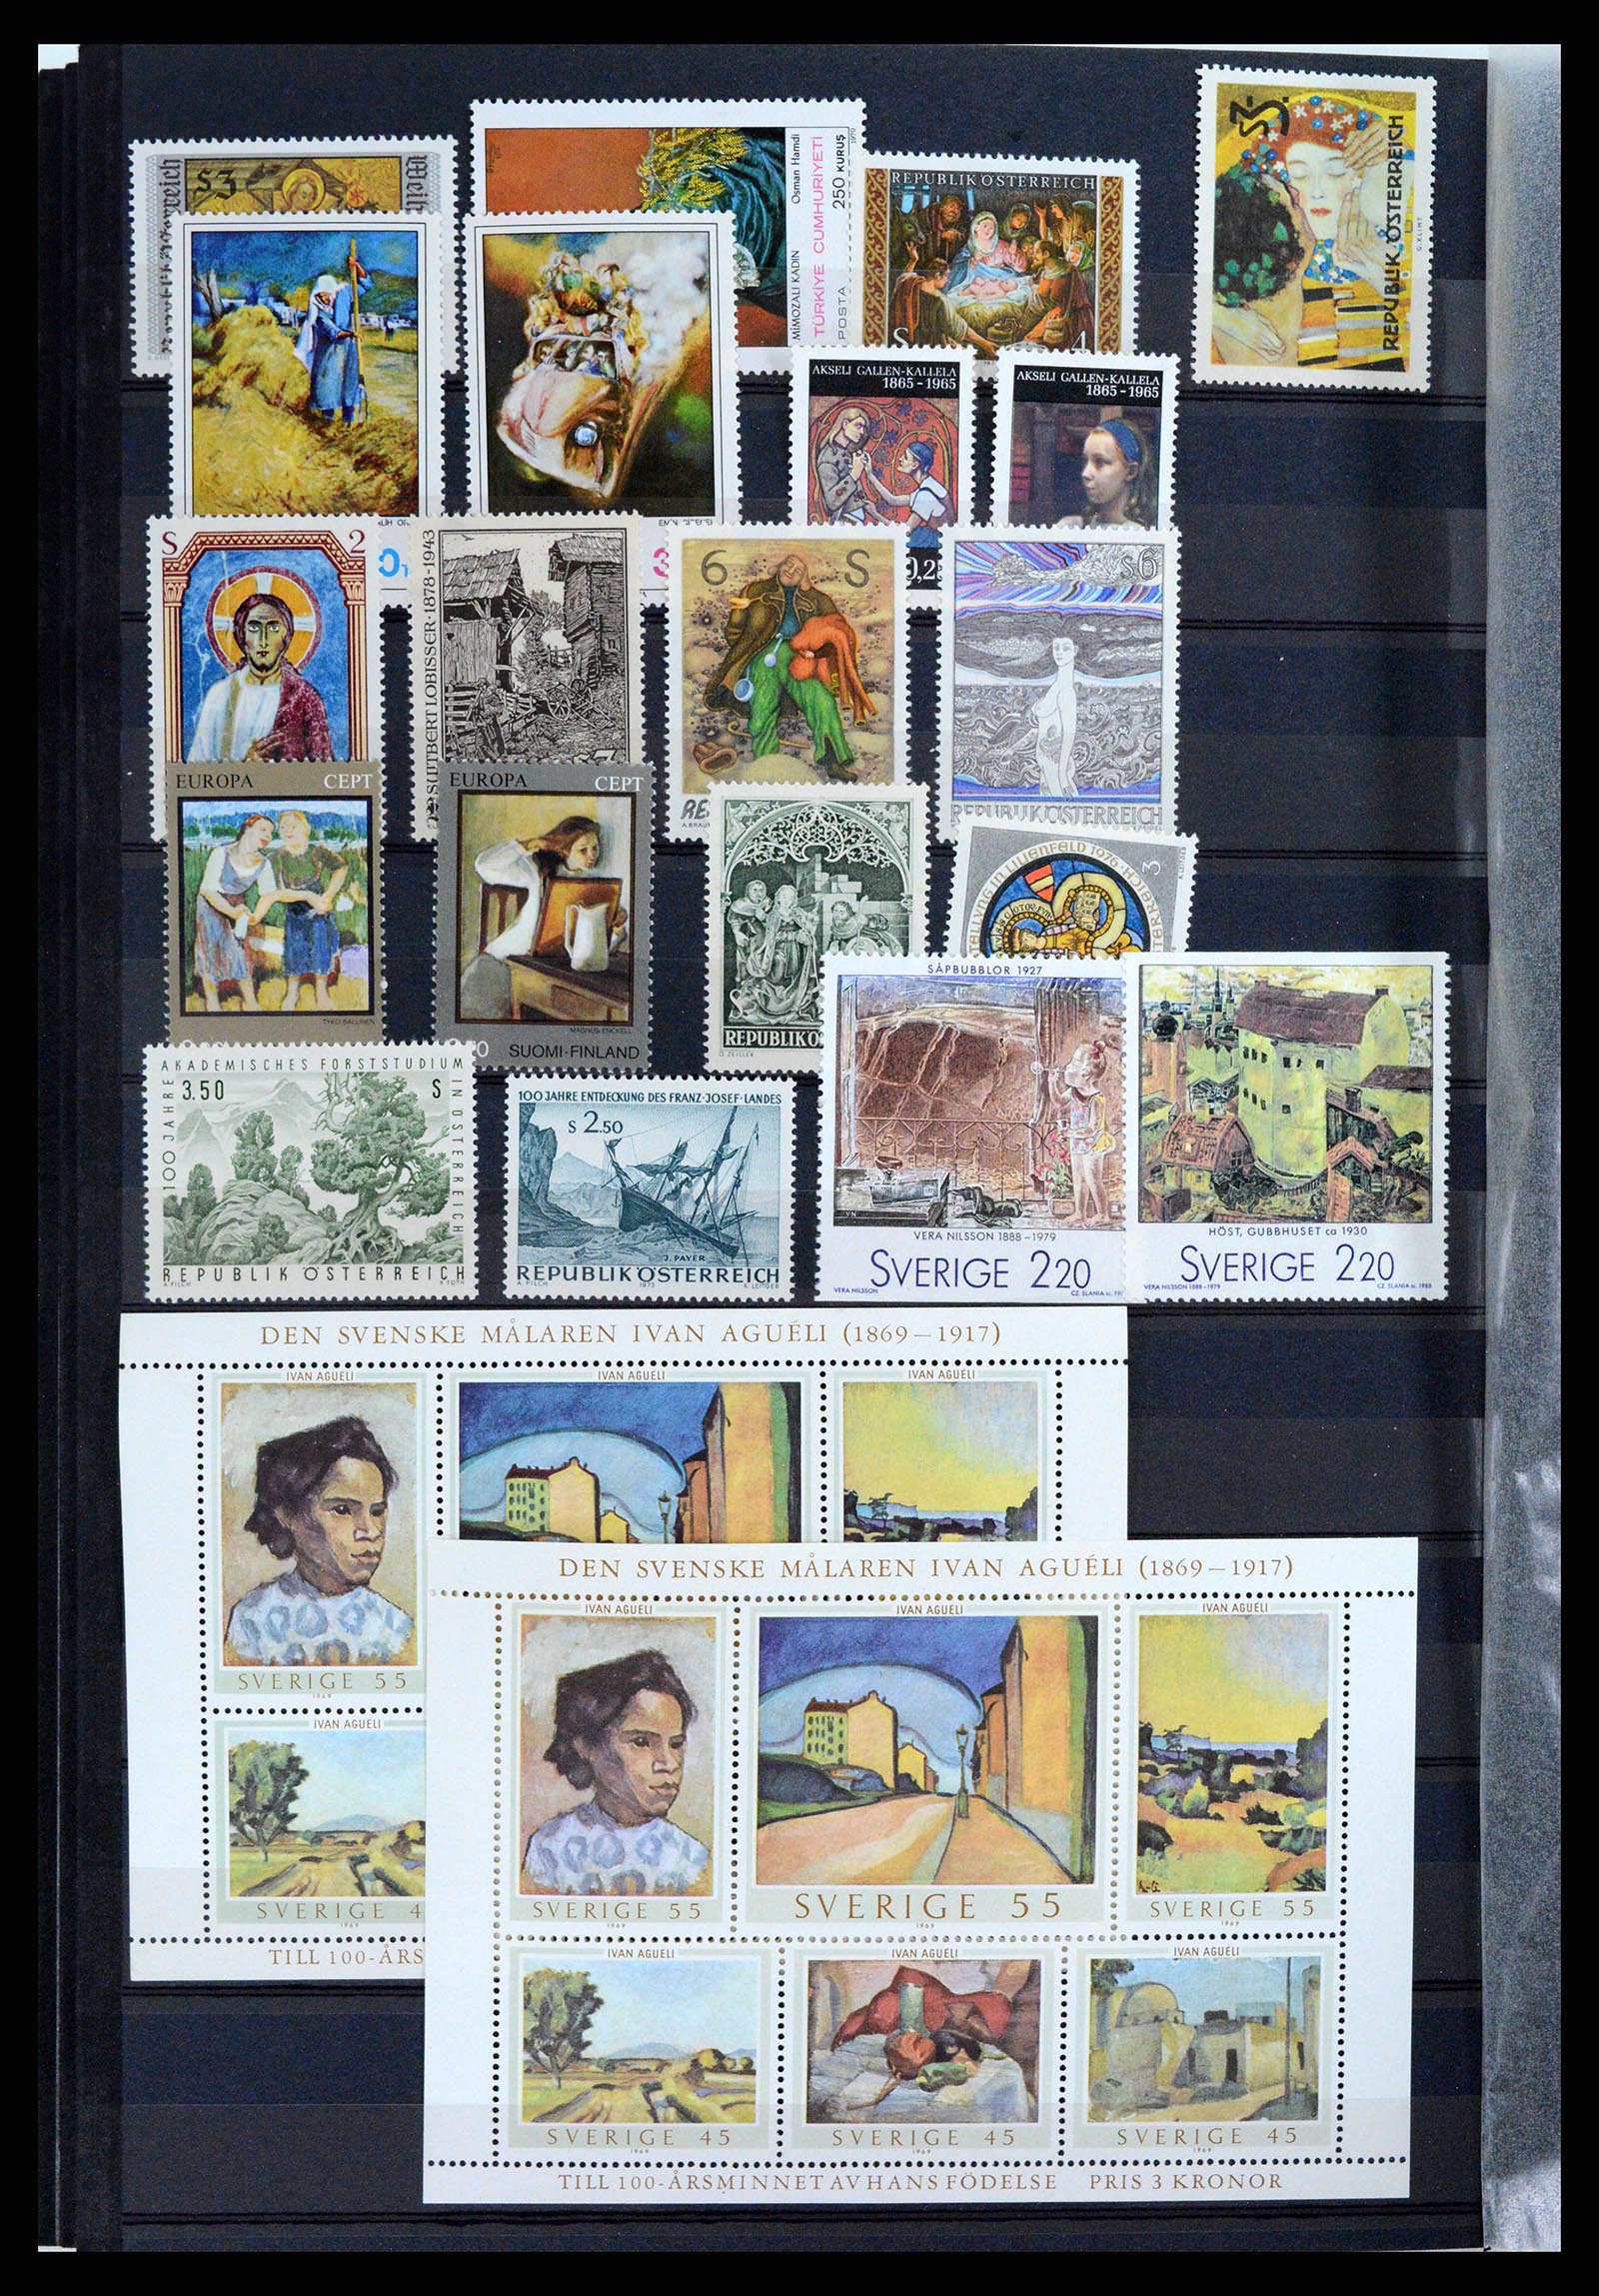 37737 090 - Stamp collection 37737 Thematics Art 1950-2000.